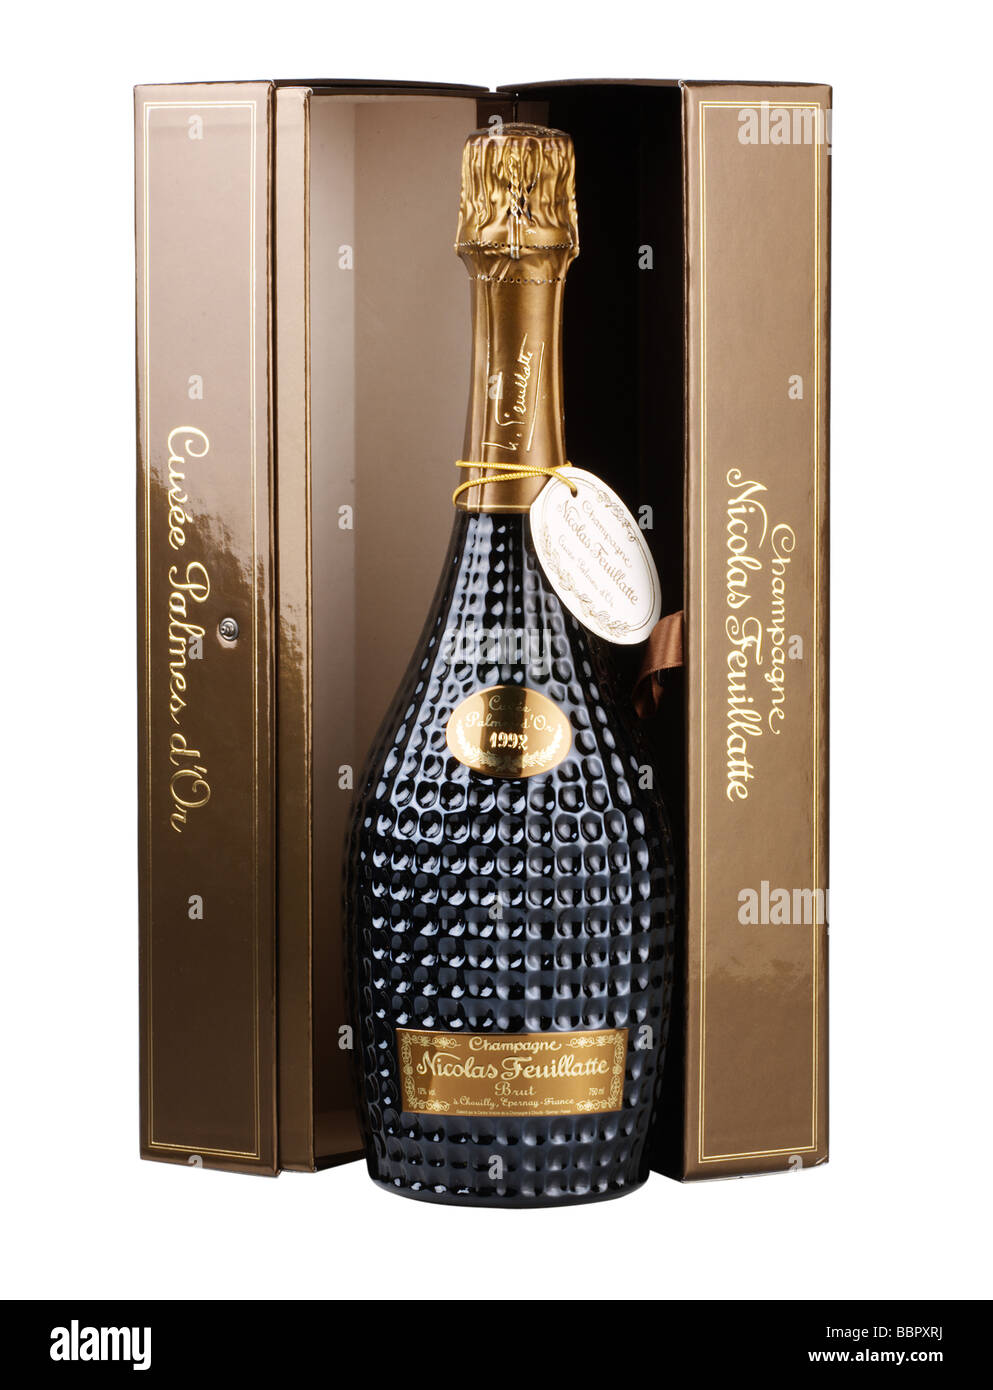 Champagne bottle and gift box Stock Photo